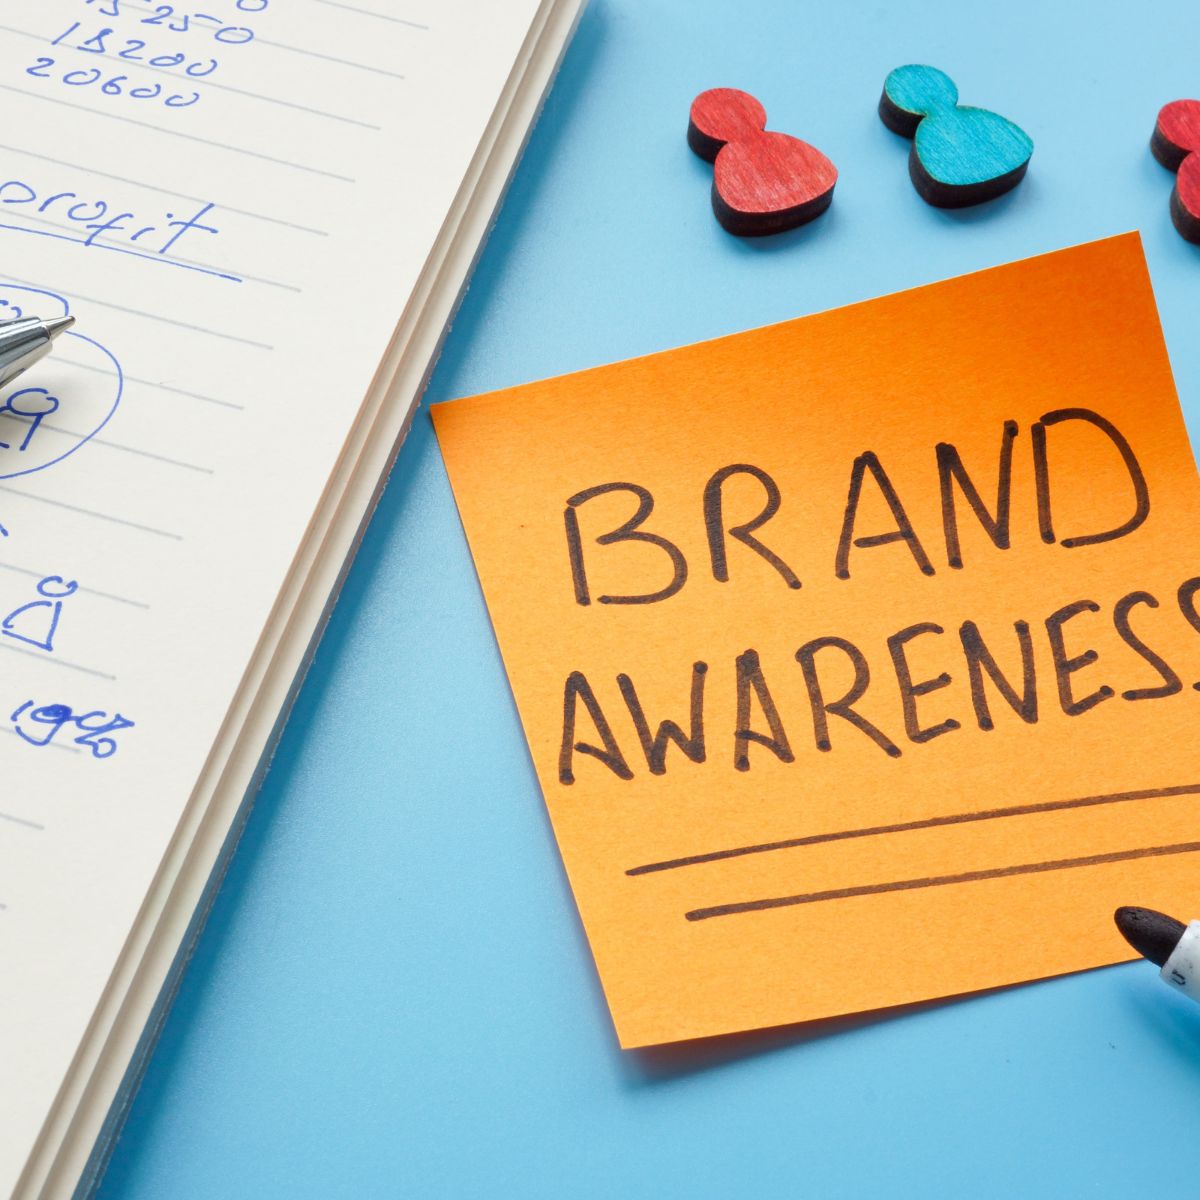 10 Ways to Increase Awareness, Engagement, and Conversions on Your Website